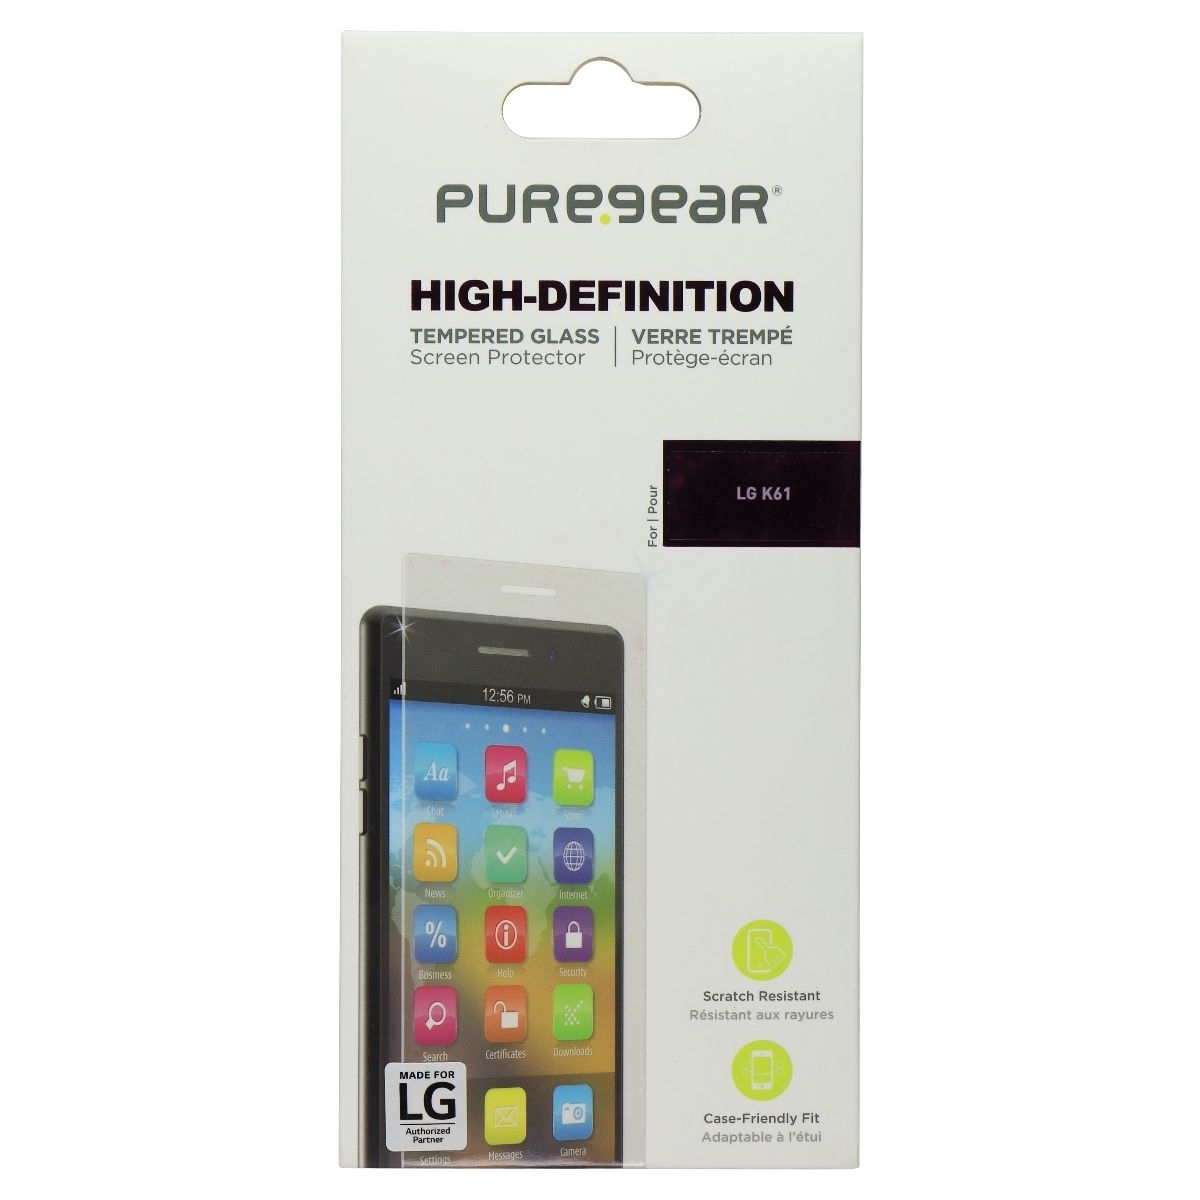 PureGear High-Definition Tempered Glass For LG K61 (2020) - Clear (Refurbished)